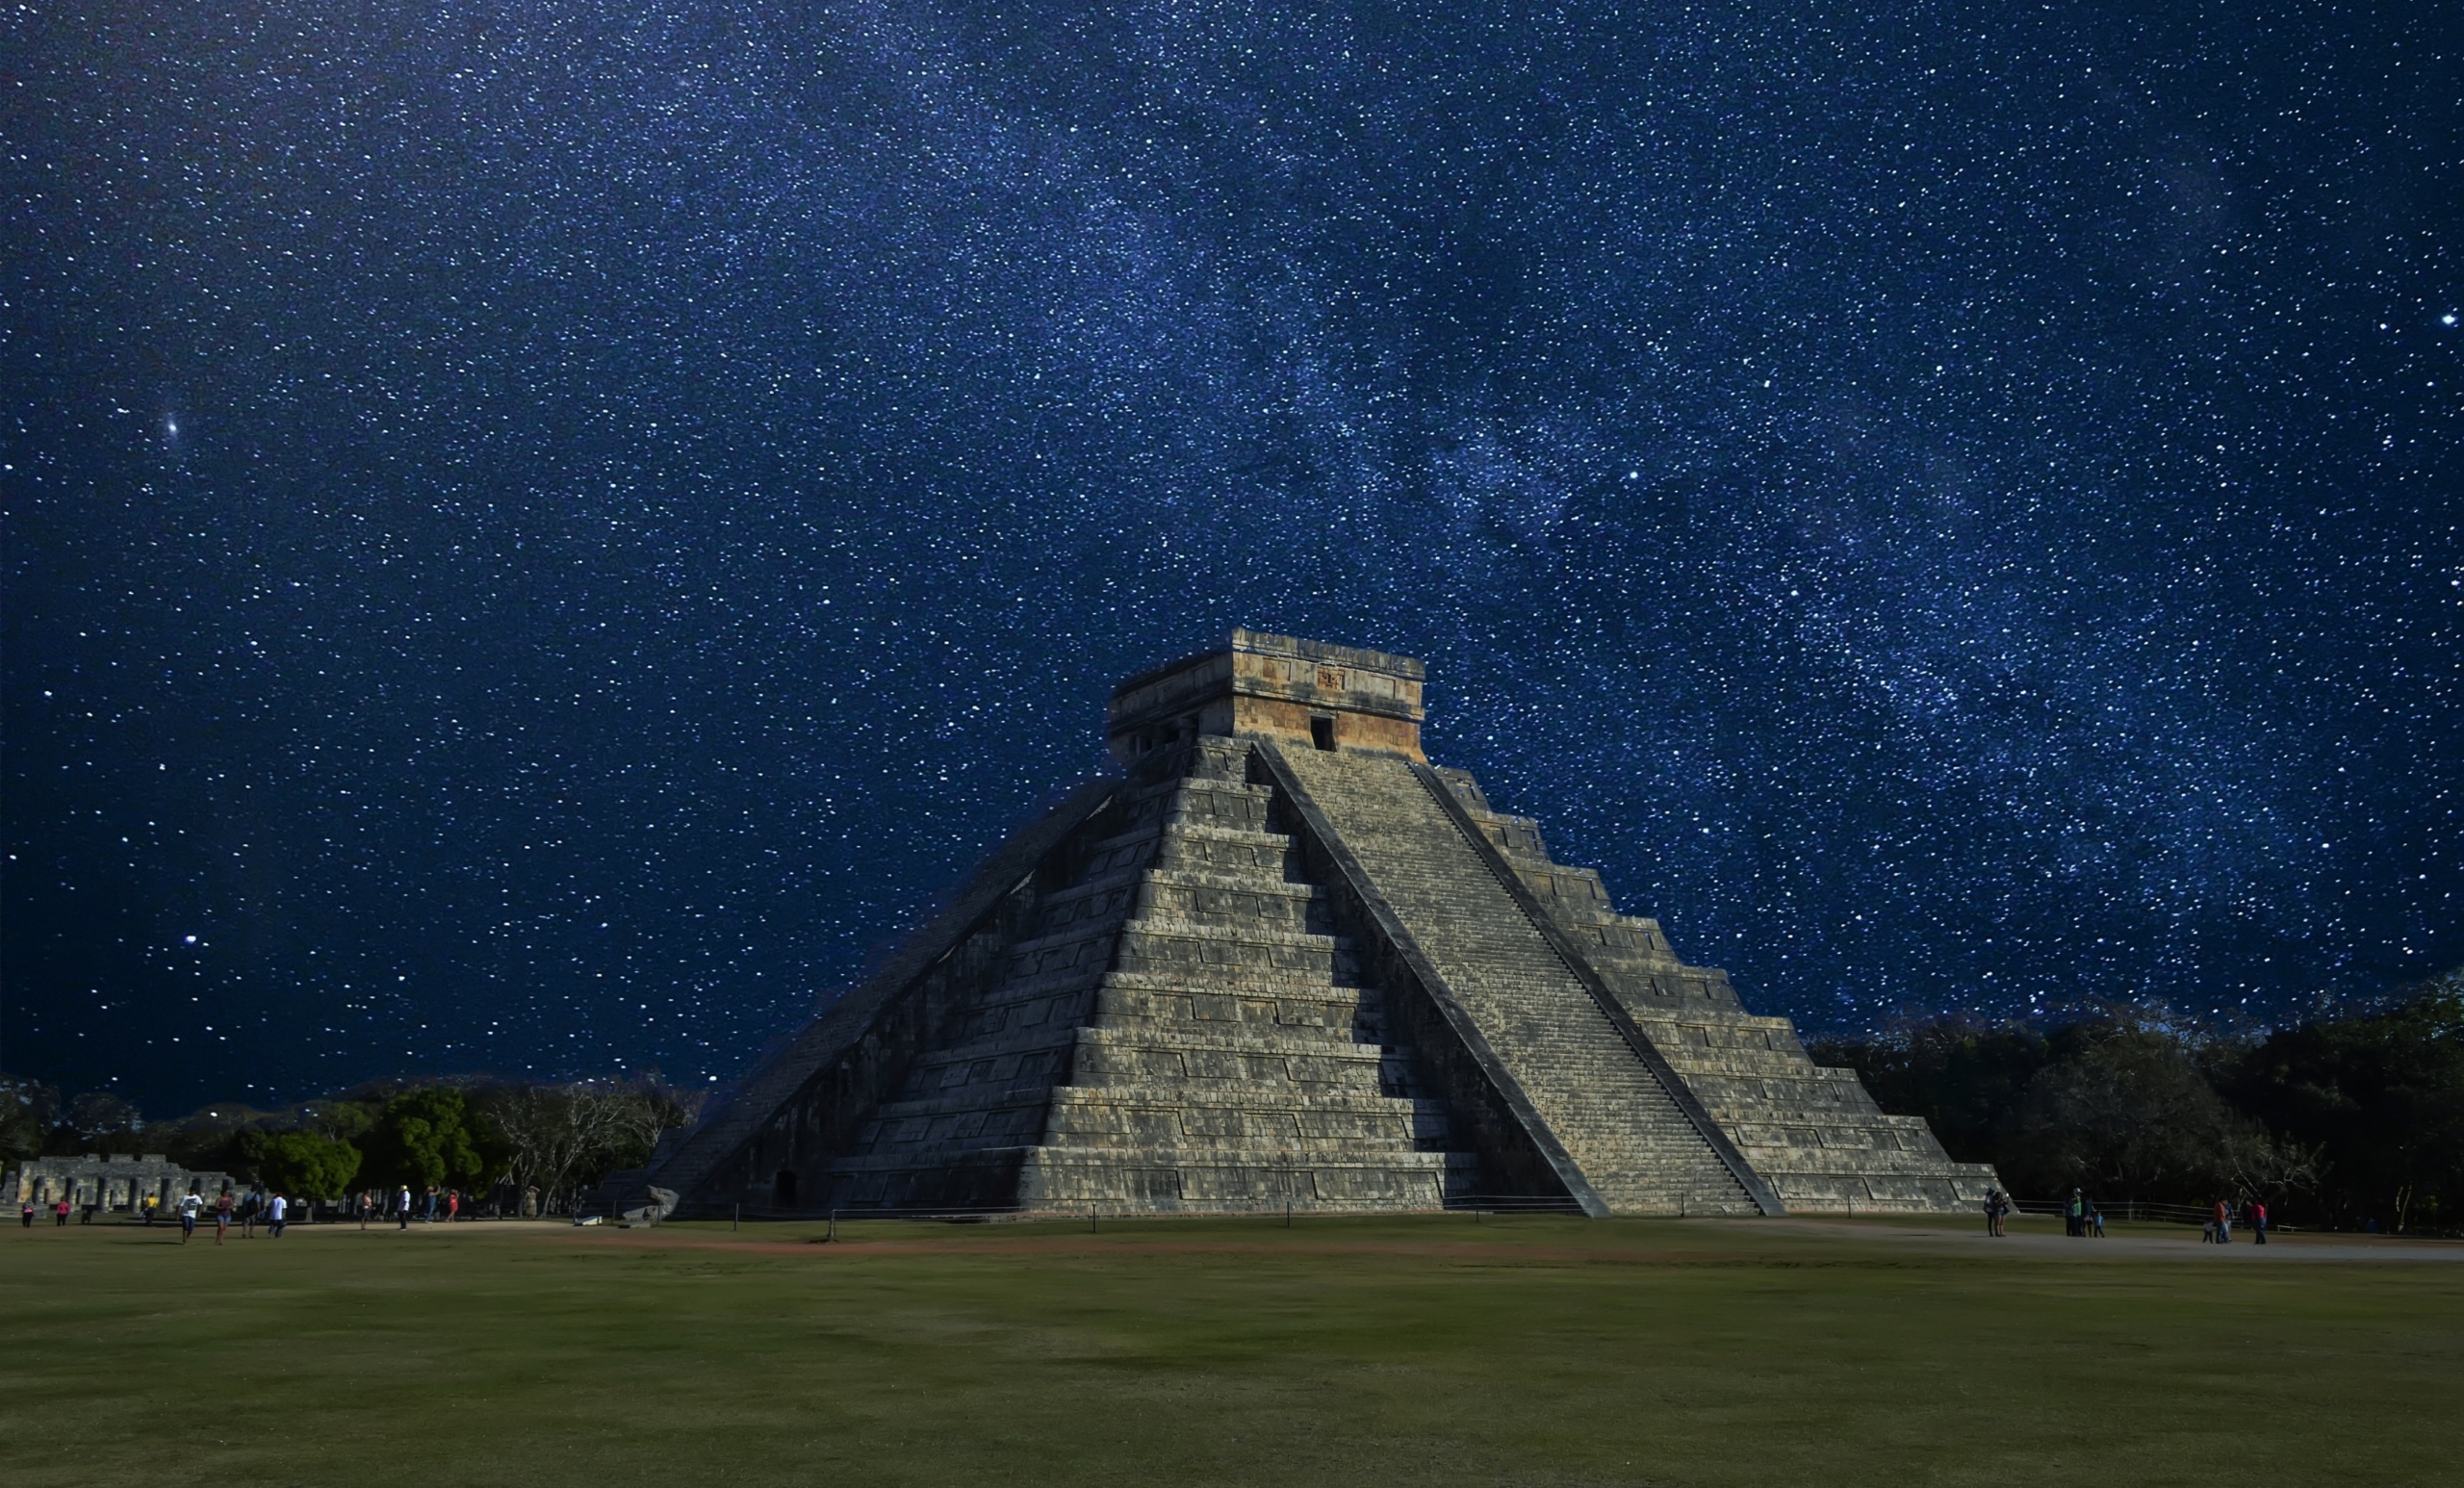 The Temple of Kukulcán, a Mesoamerican step-pyramid, against the night sky.